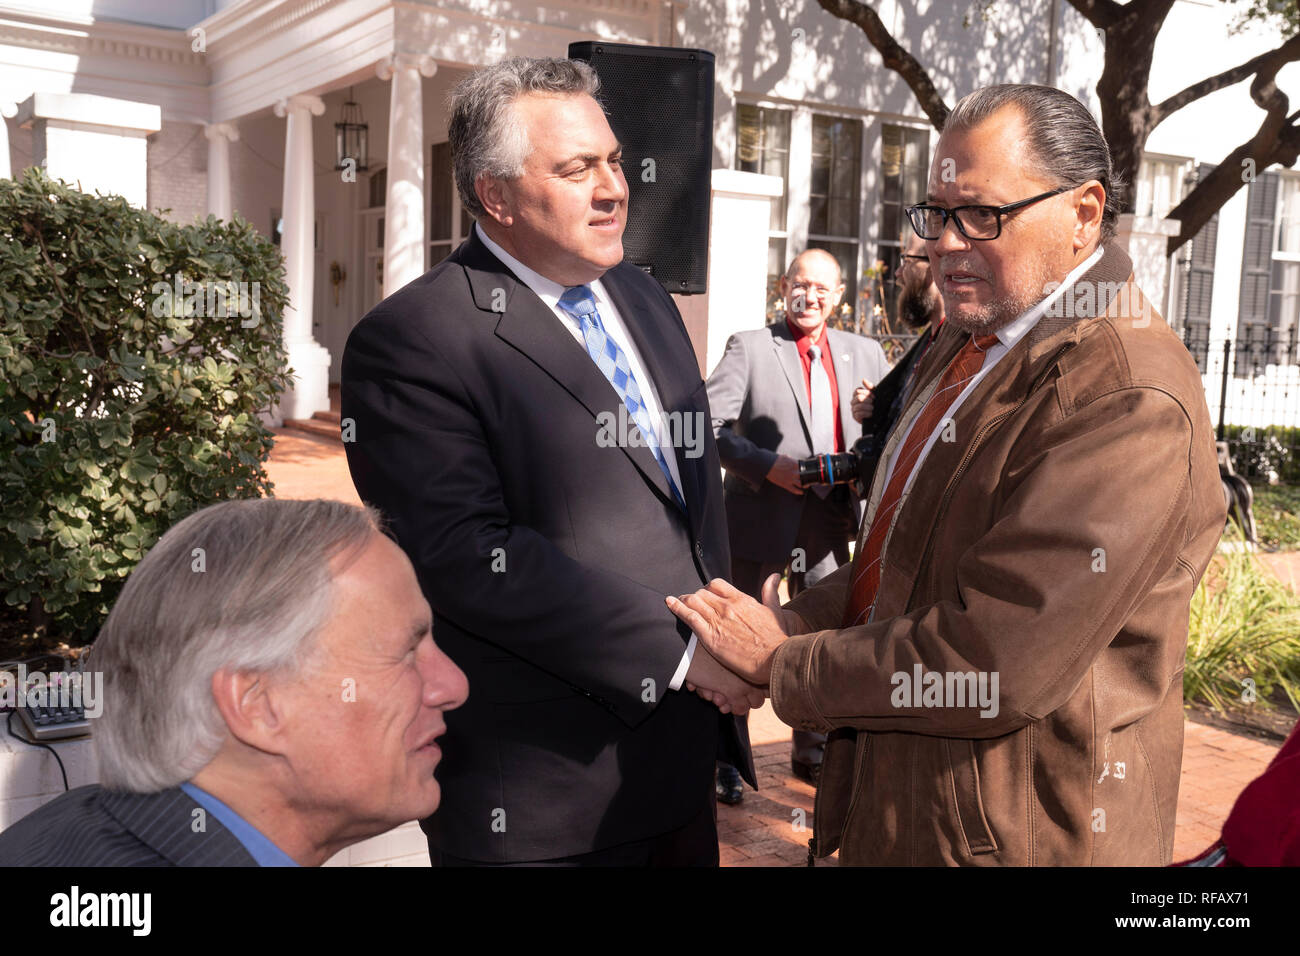 Joe Hockey, center, Australia's ambassador to the United States, shakes hands with Texas state Sen. Jose Rodriguez as Texas Gov. Greg Abbott looks on during the Great Mates Australia-Texas Barbecue at the Governor's Mansion. Abbott and Hockey worked to strengthen ties between the allies discussing agriculture and high tech before eating Australian Vegemite burnt ends and HeartBrand Akaushi beef. Stock Photo